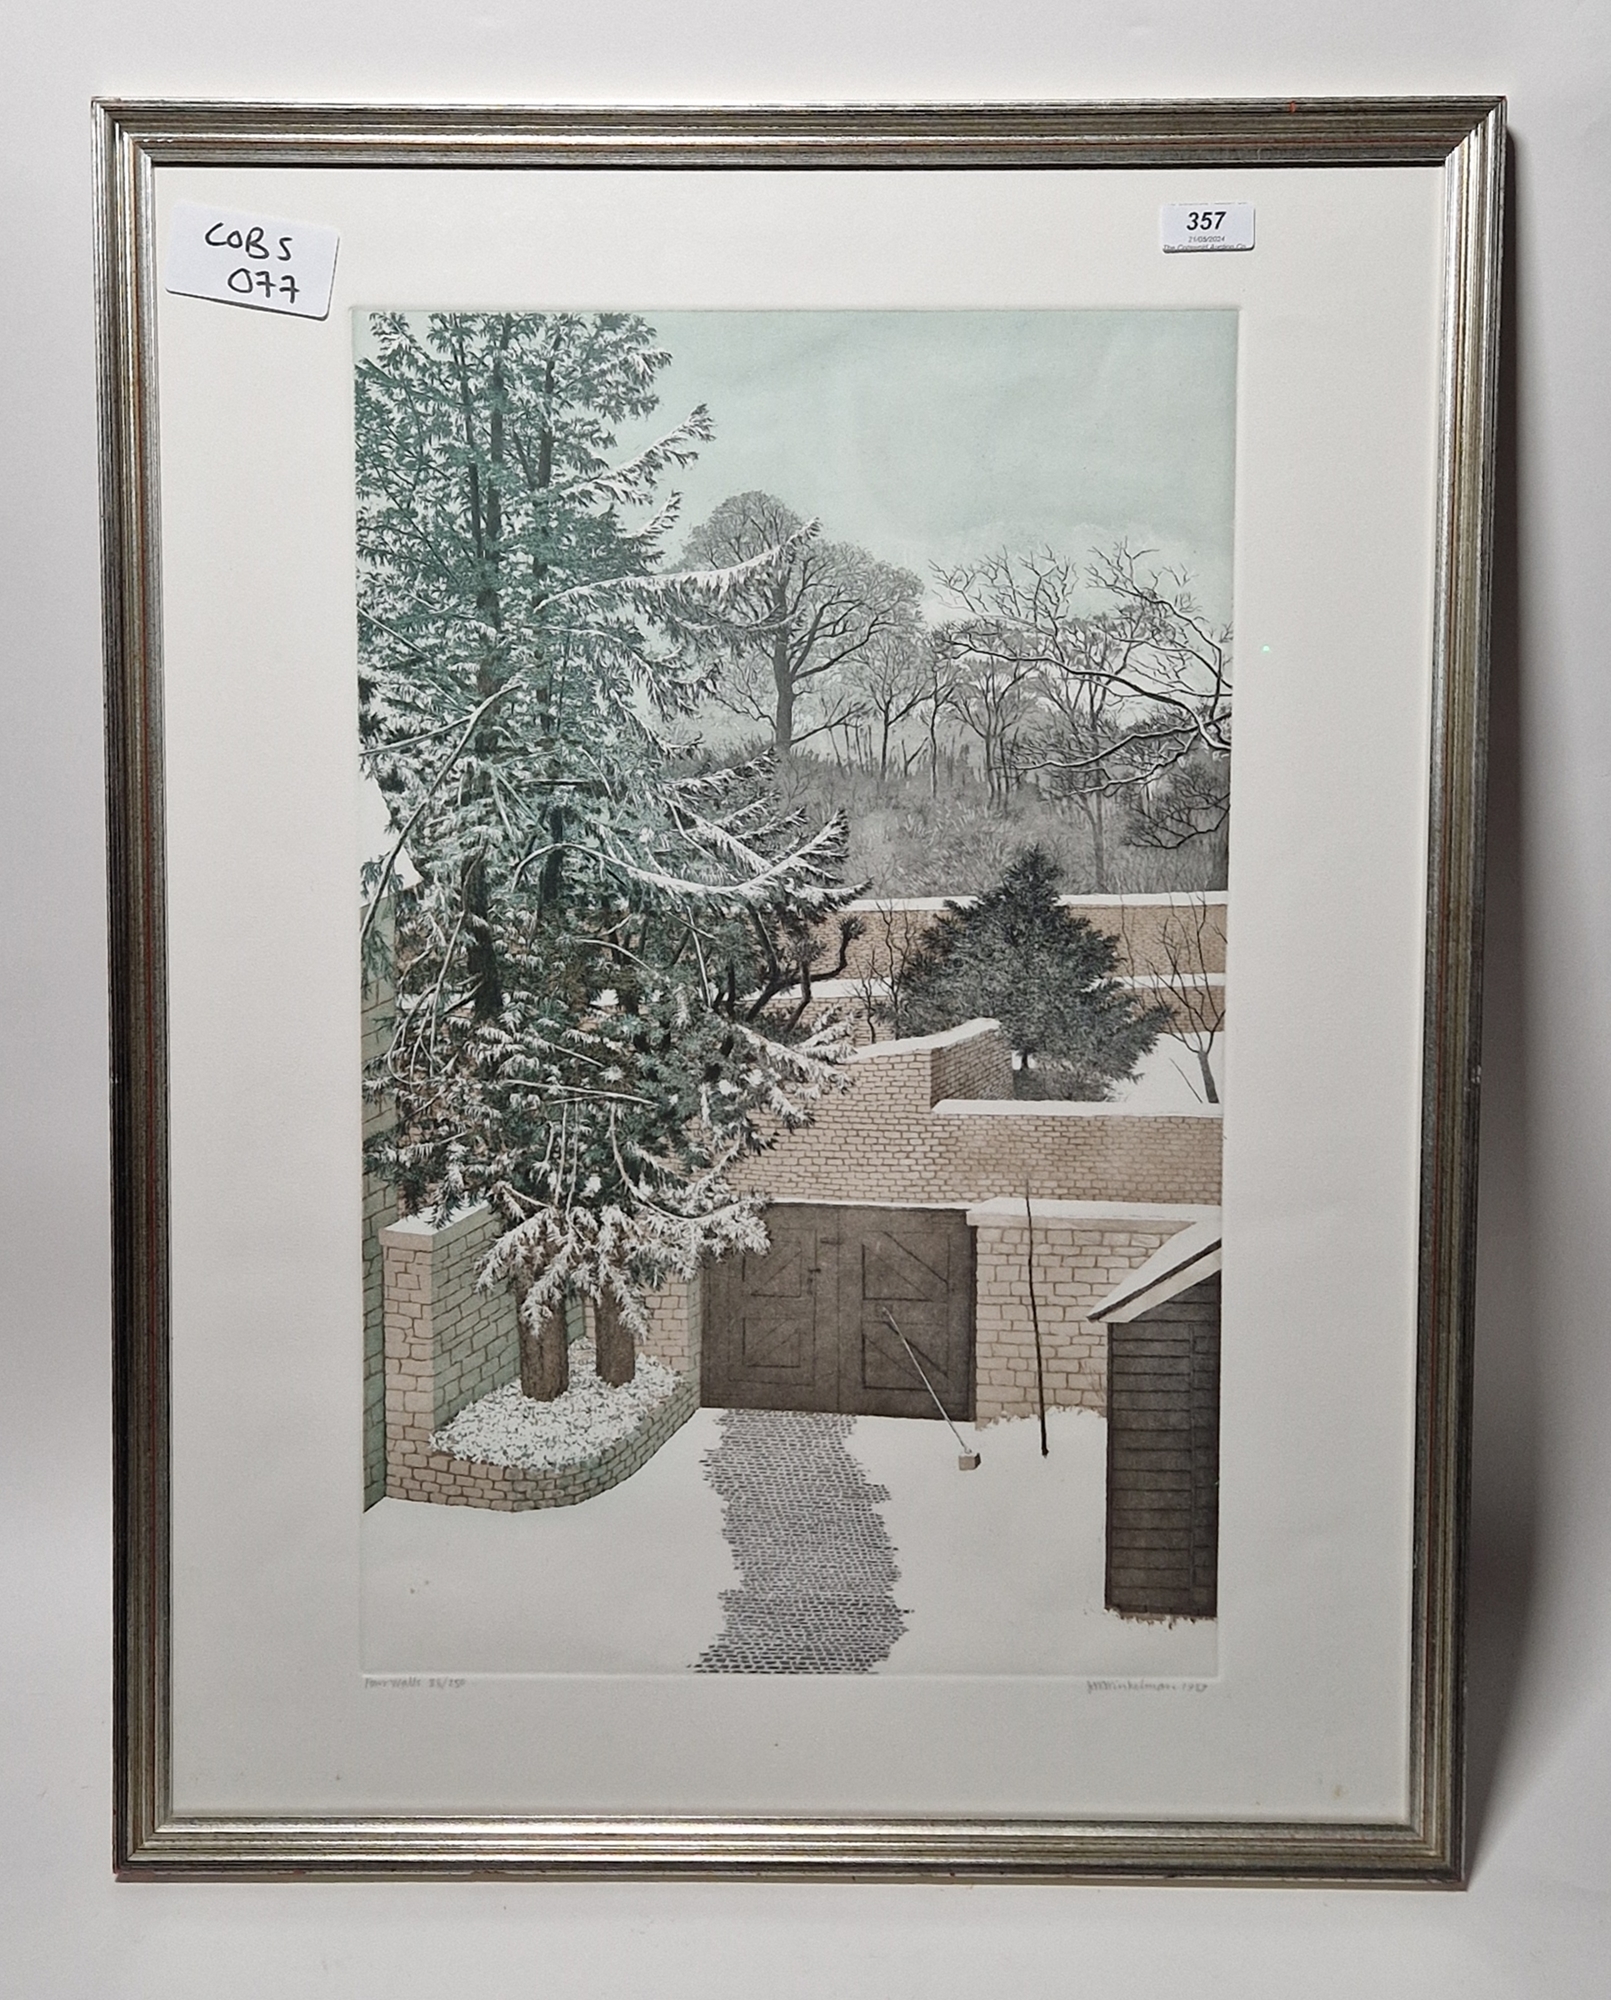 Joseph Winkleman (b.1941) Etching and aquatint on paper "Four Walls", limited edition print, signed, - Image 4 of 6